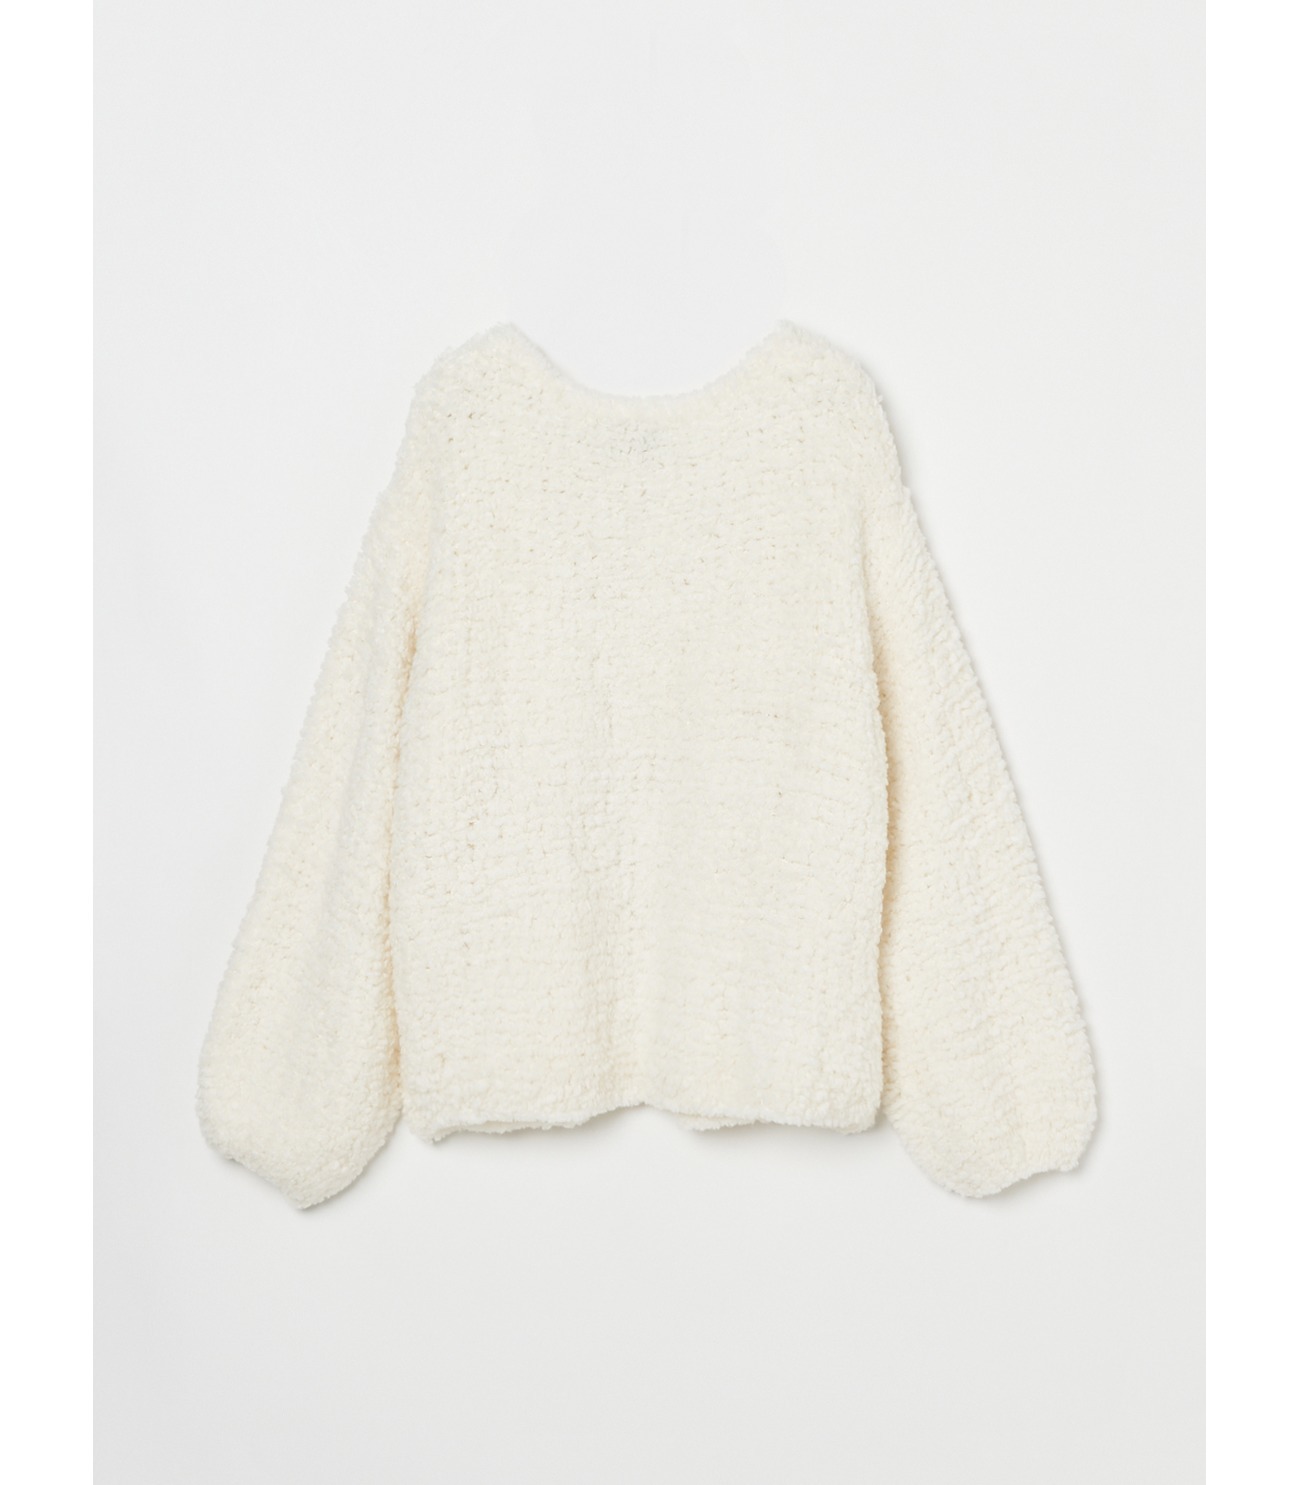 Hand knited jacket 詳細画像 off white 1